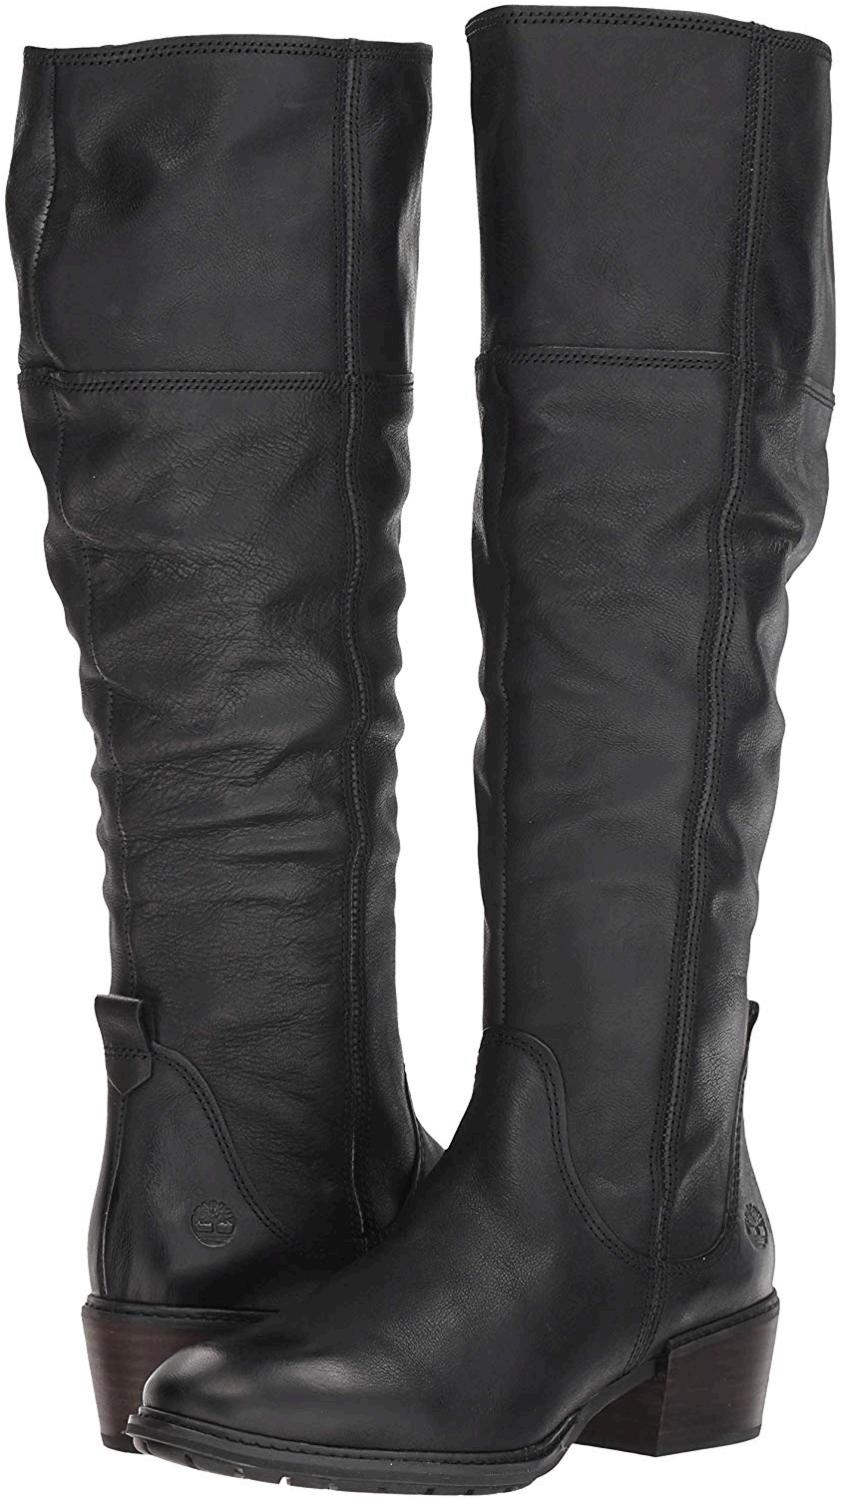 Timberland Women's Sutherlin Bay Tall Boot Knee High, Black, Size 9.0 ...